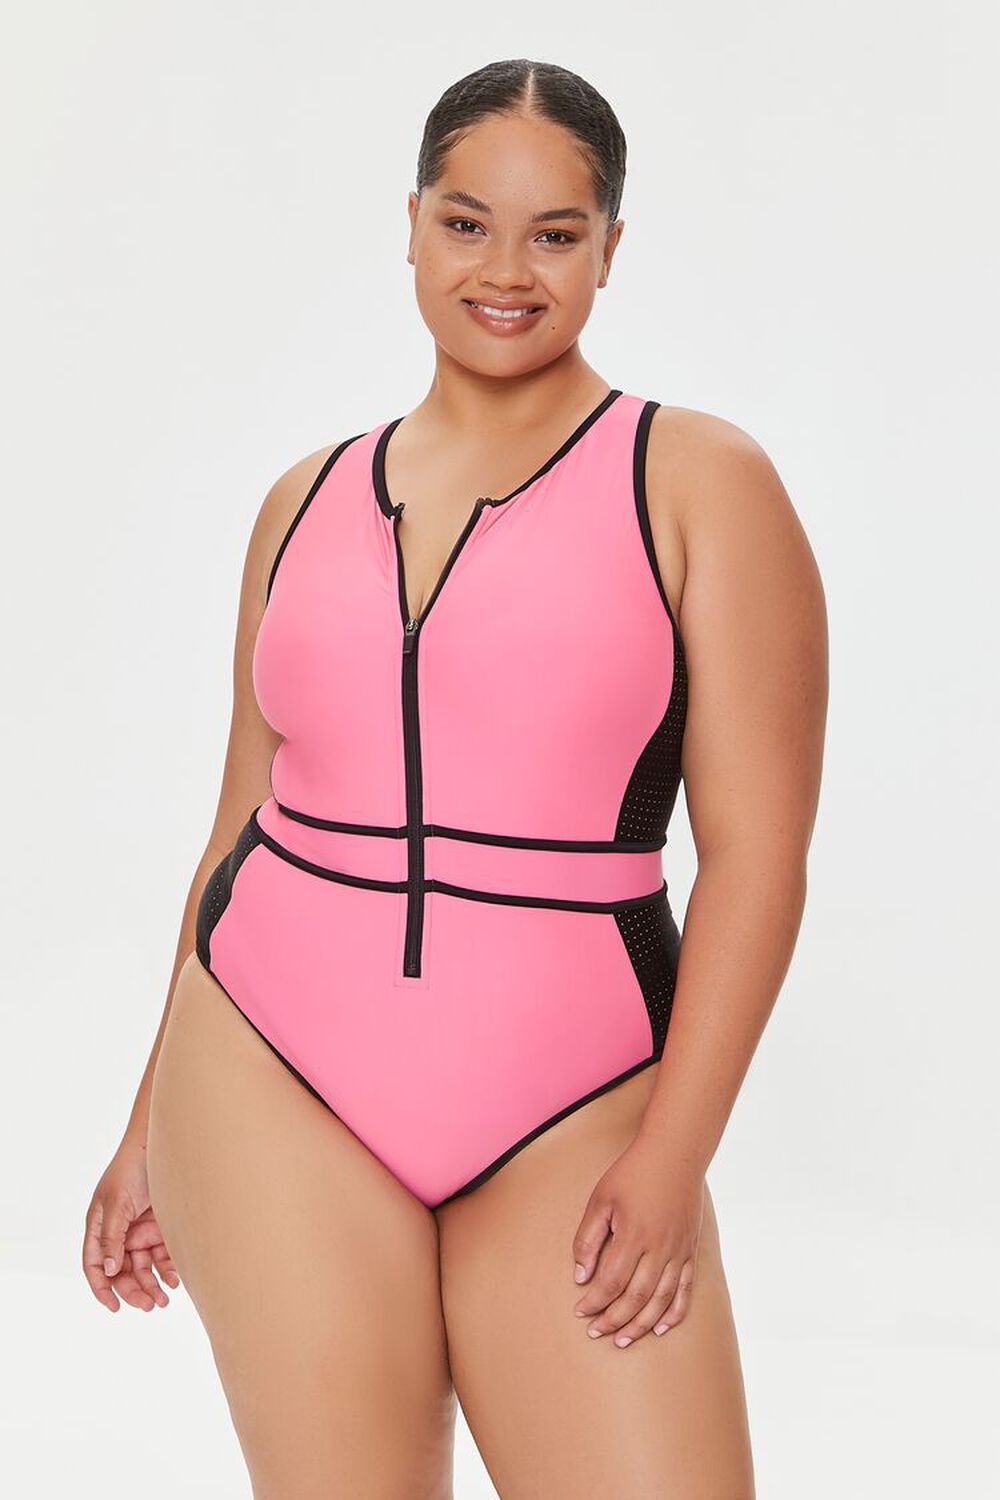 PINK Plus Size One-Piece Swimsuit, image 1